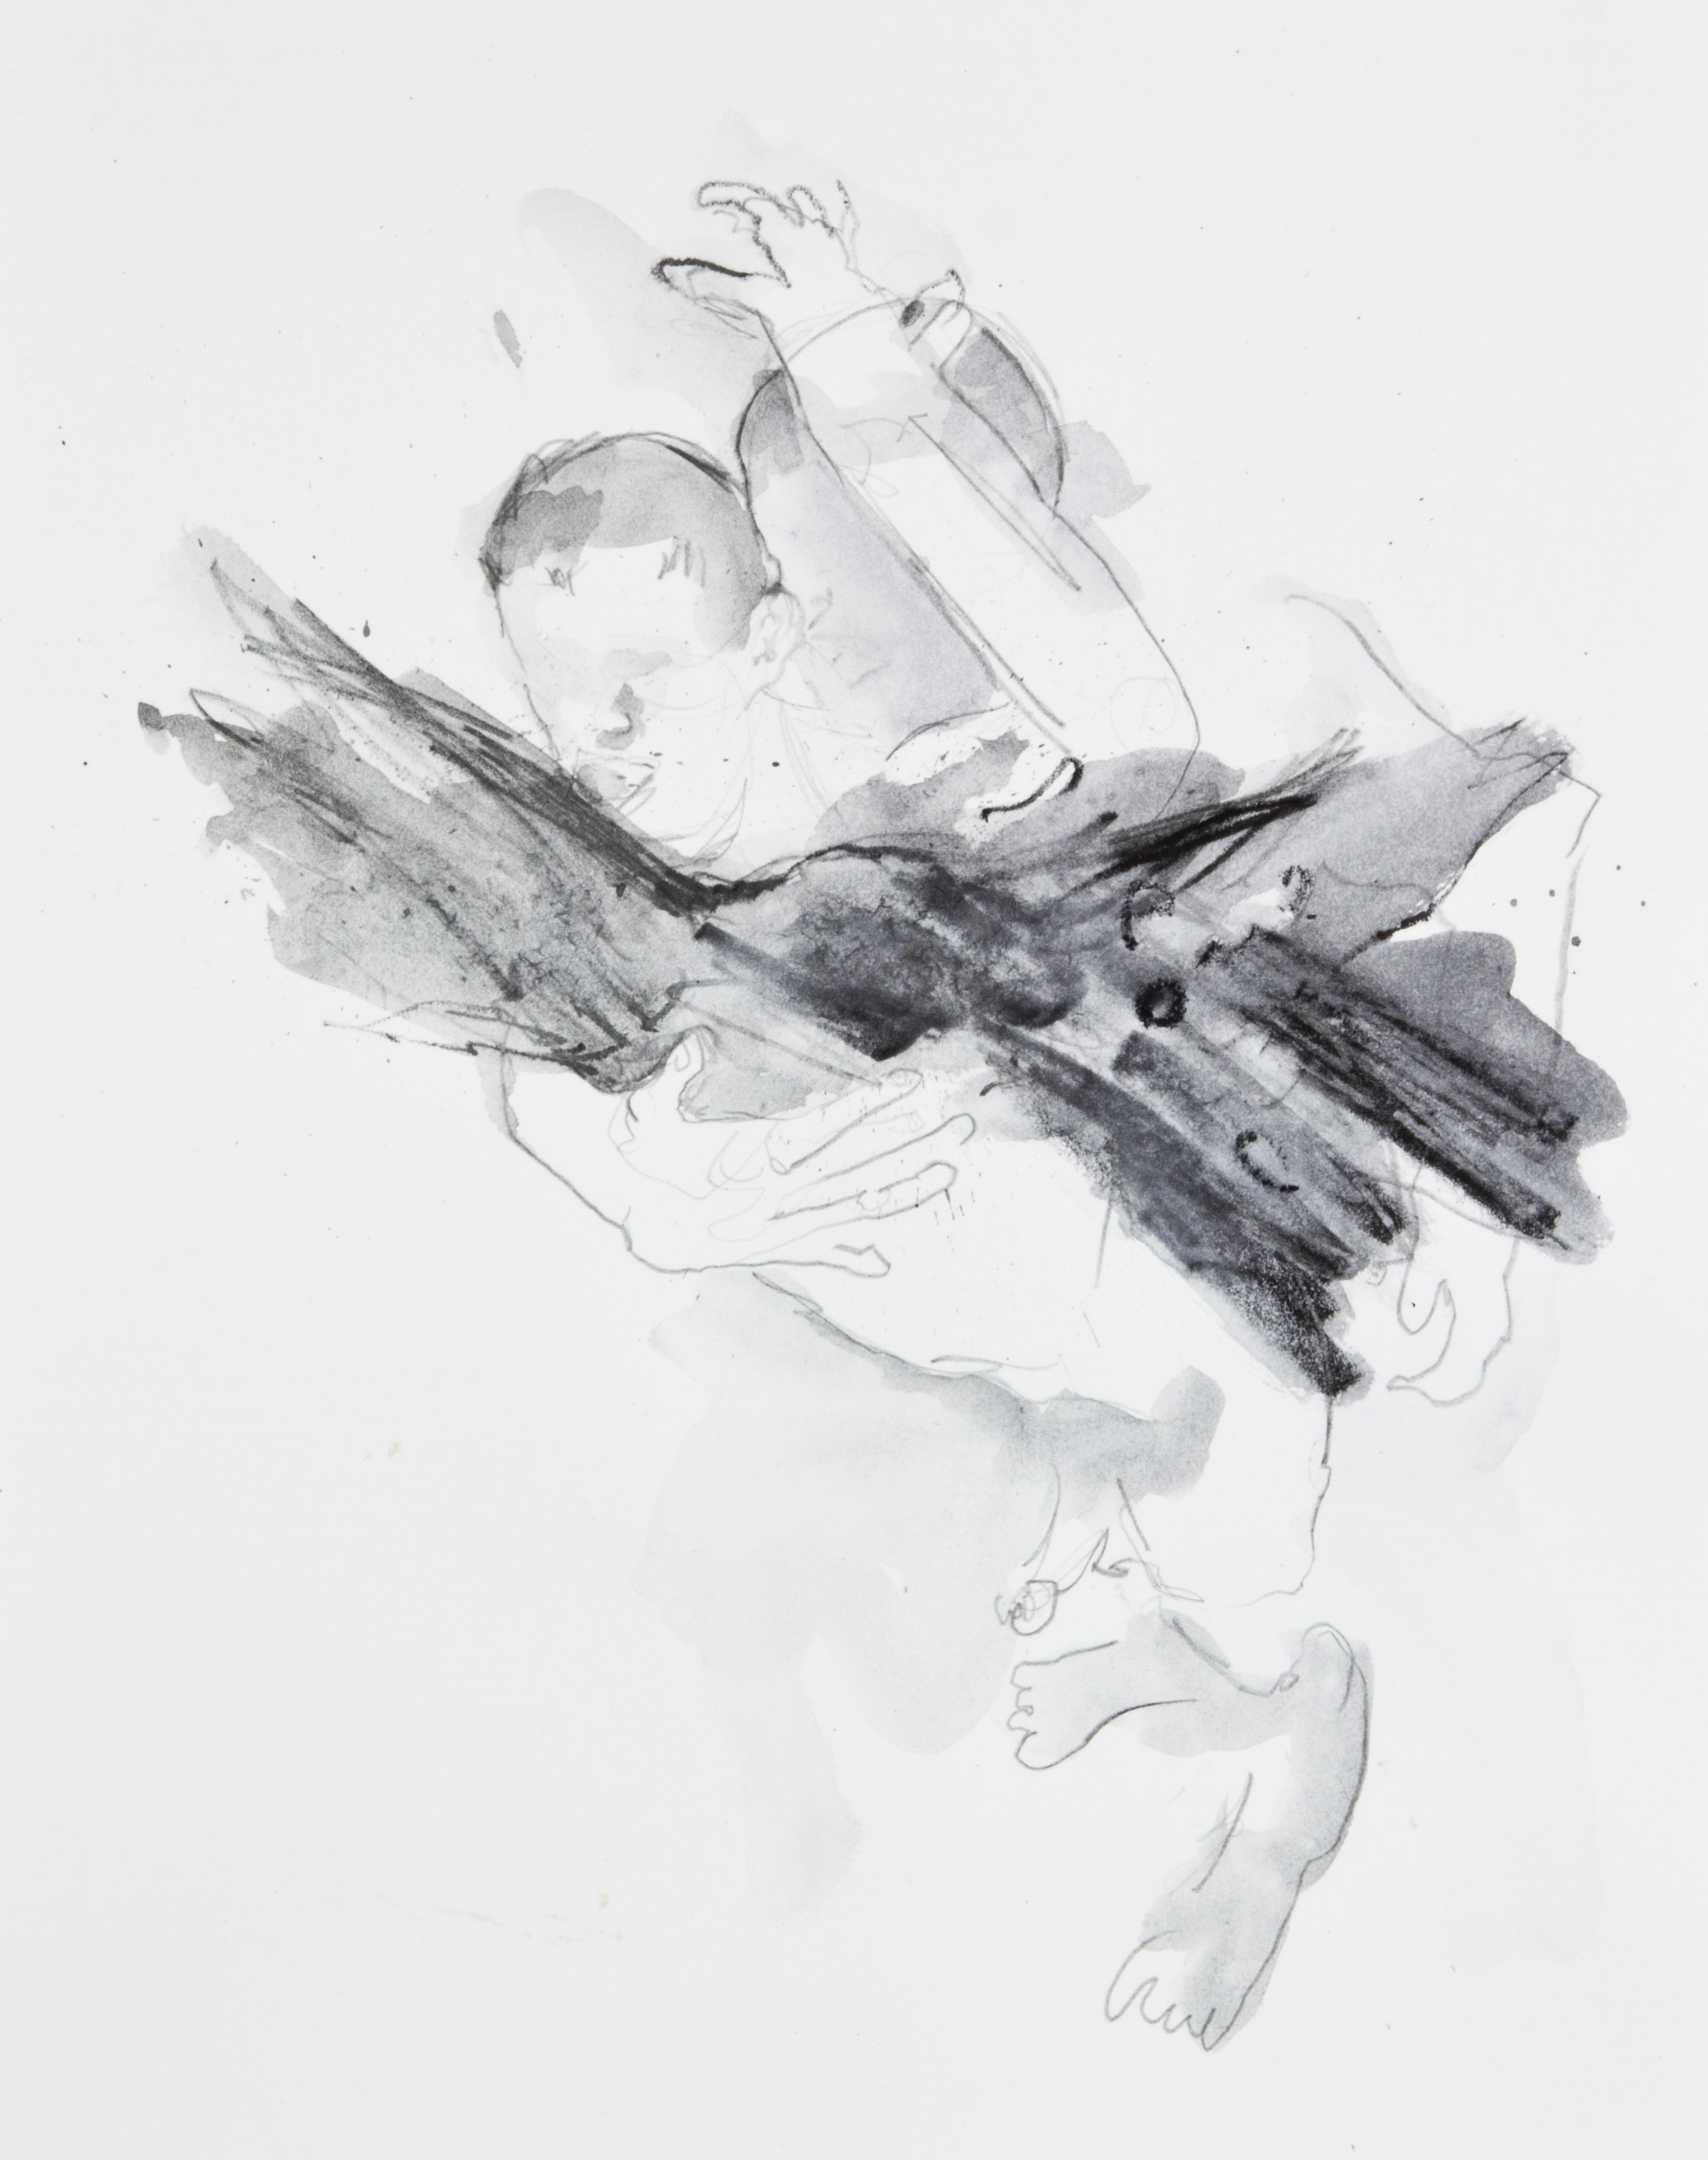 Forming Out Of Nothing, 2013, graphite on paper, 11x14 inches